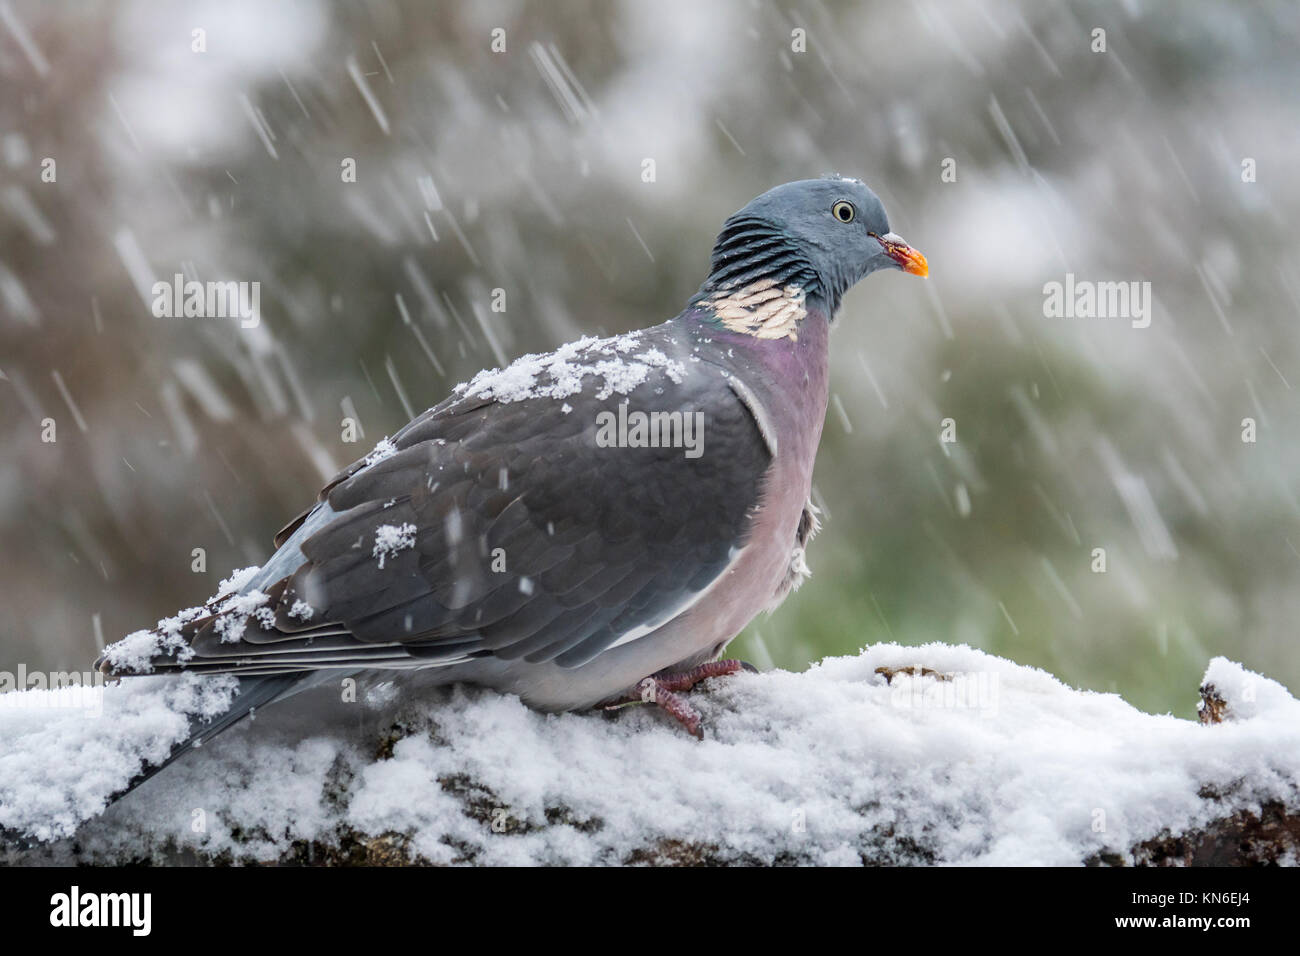 Common wood pigeon (Columba palumbus) perched in tree during heavy snow shower in winter Stock Photo